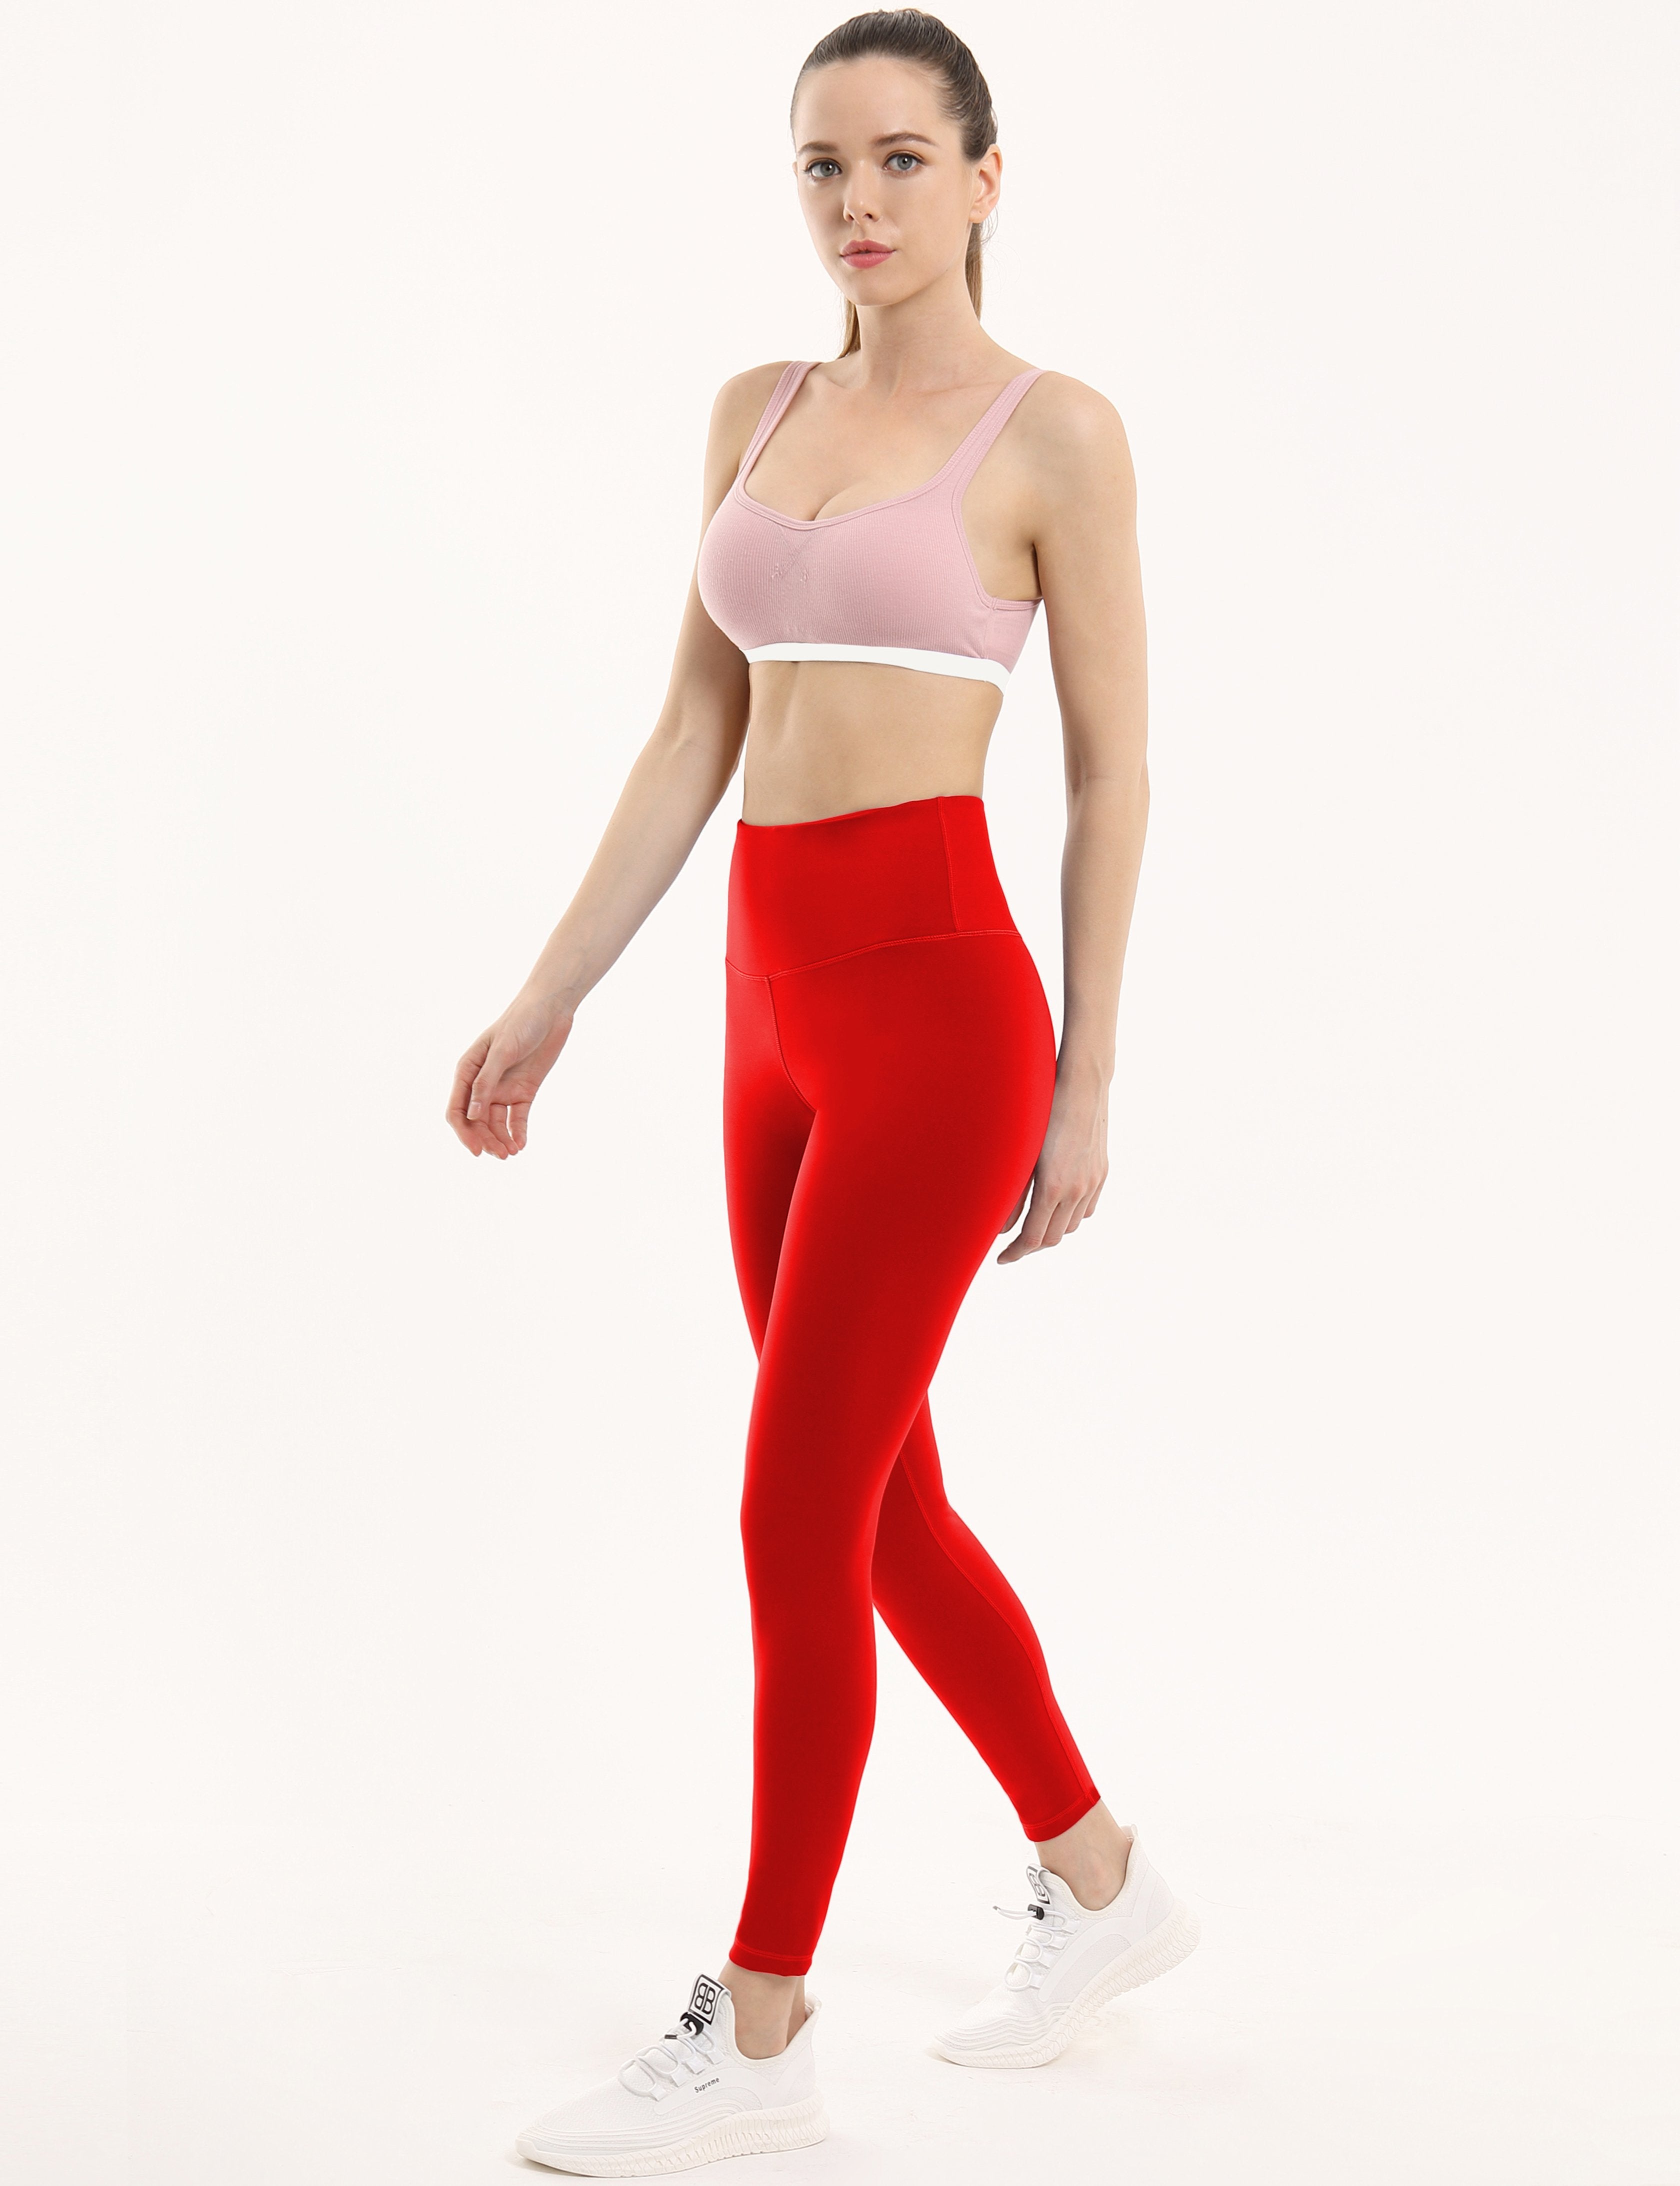 High Waist Yoga Pants scarlet 75%Nylon/25%Spandex Fabric doesn't attract lint easily 4-way stretch No see-through Moisture-wicking Tummy control Inner pocket Four lengths